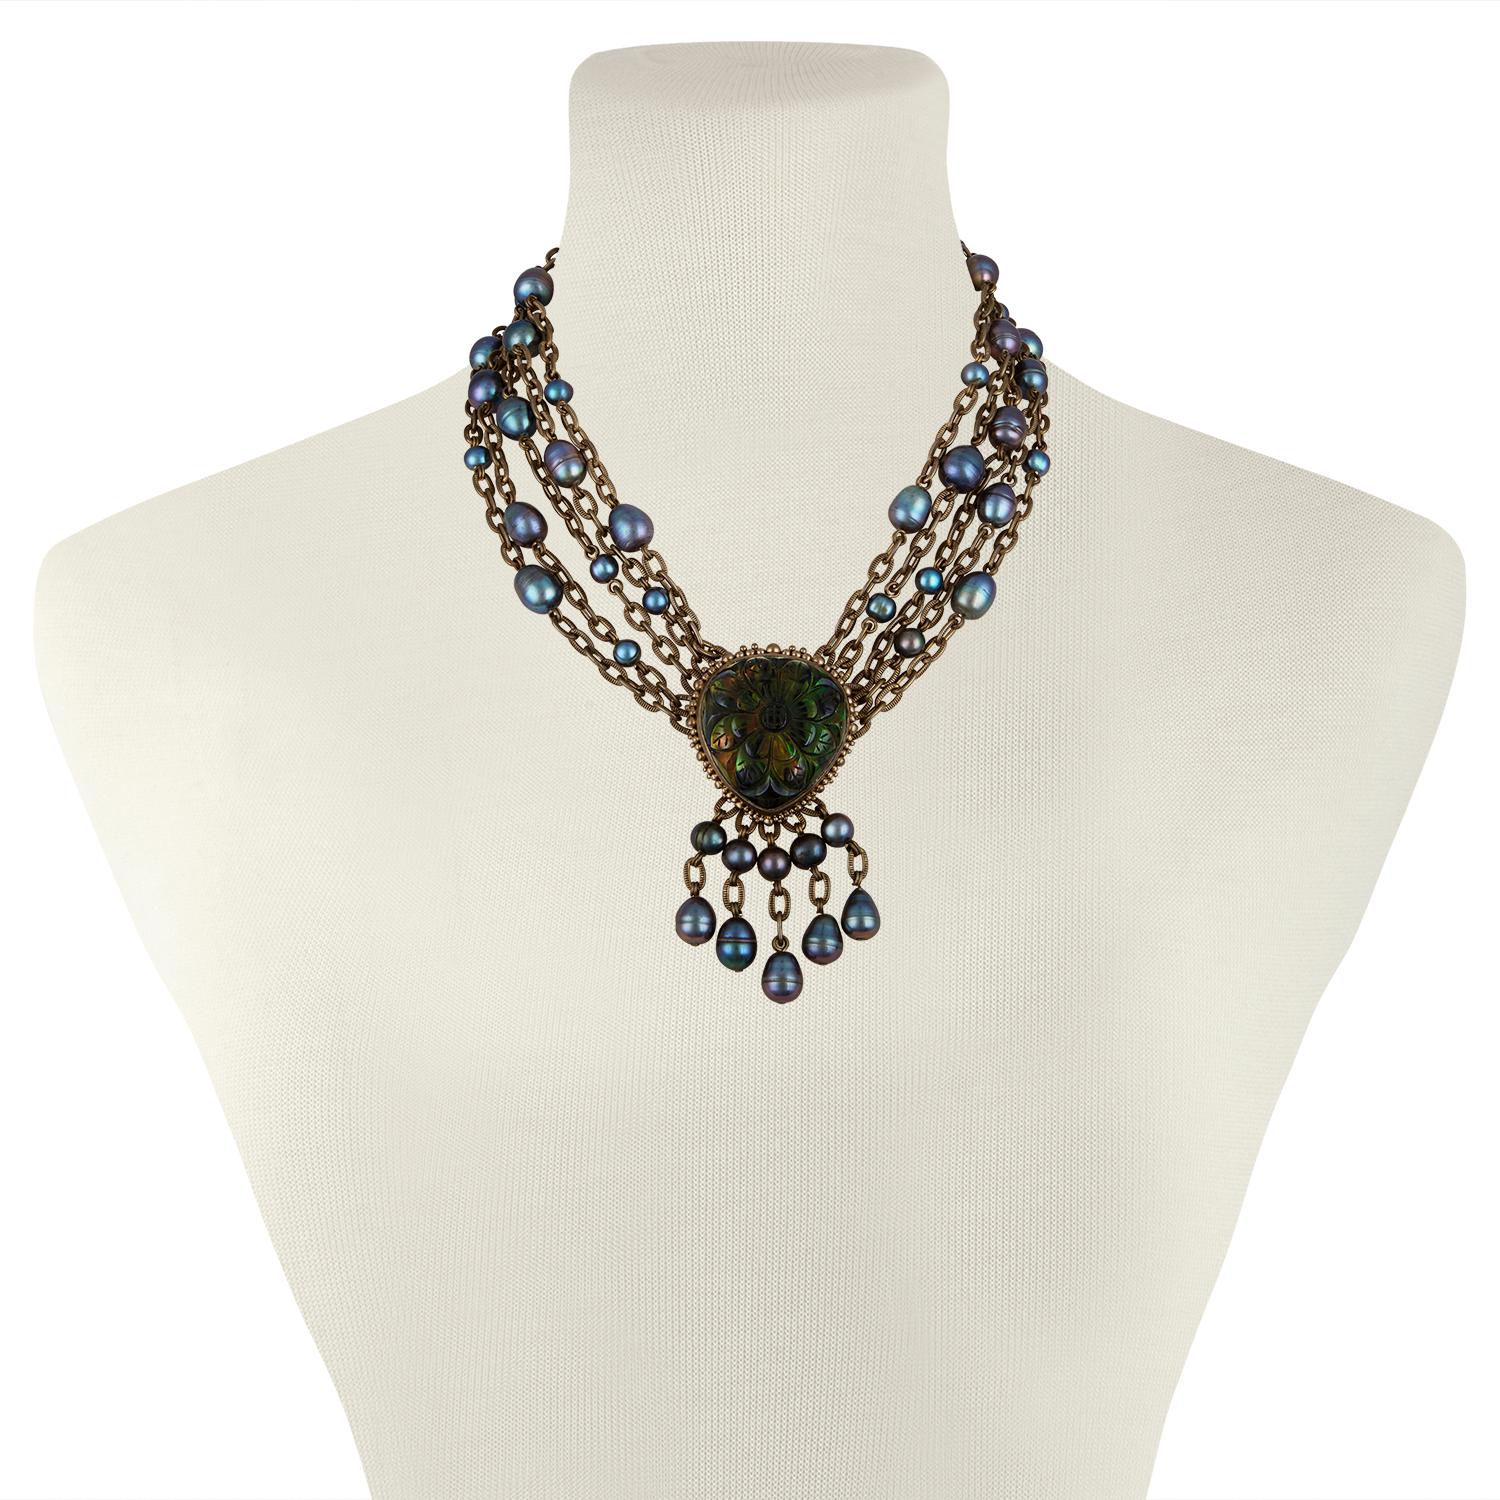 Bronze Stephen Dweck collar multi-strand necklace
Featuring carved fancy cut quartz over mother of pearl doublet
Baroque oval cultured pearl and toggle closure
The necklace measures 17.5